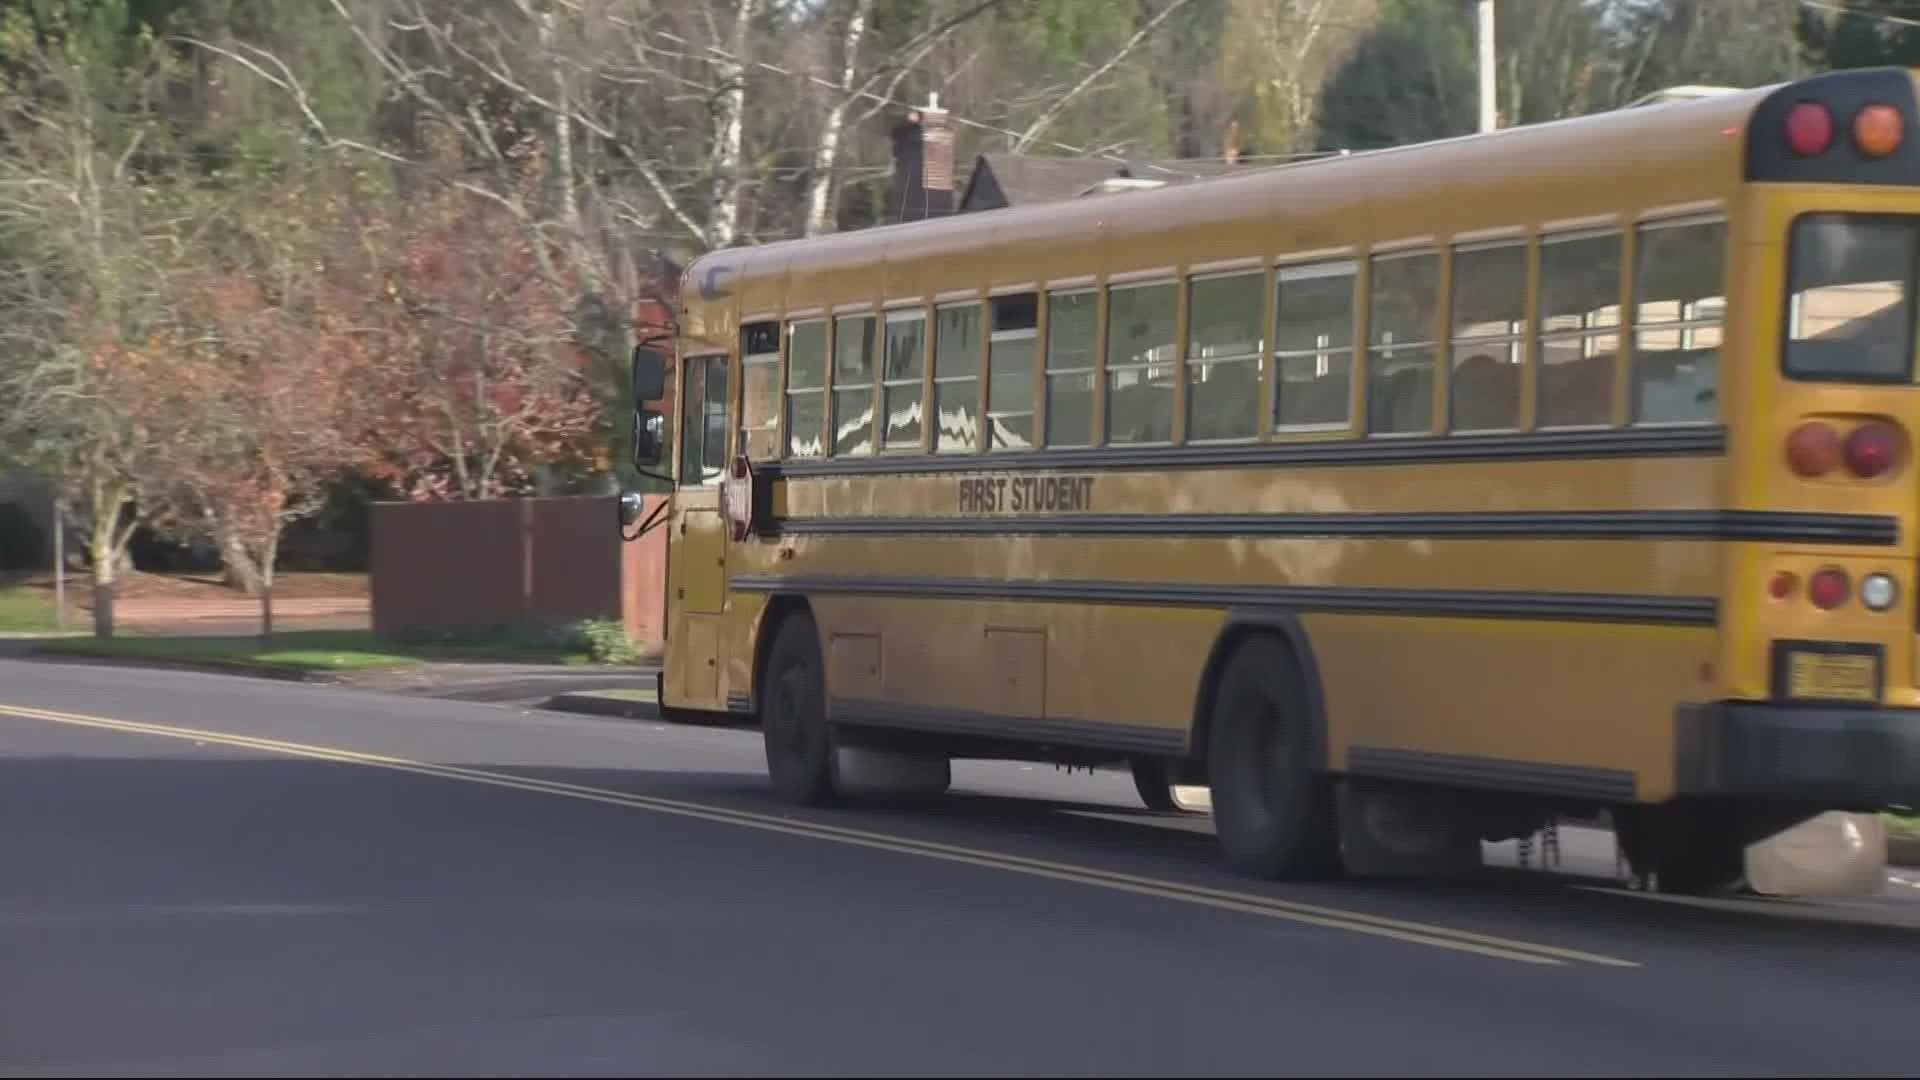 PPS is experiencing a shortage of bus drivers and canceling routes as a result. Some parents say kids are missing school because of it.